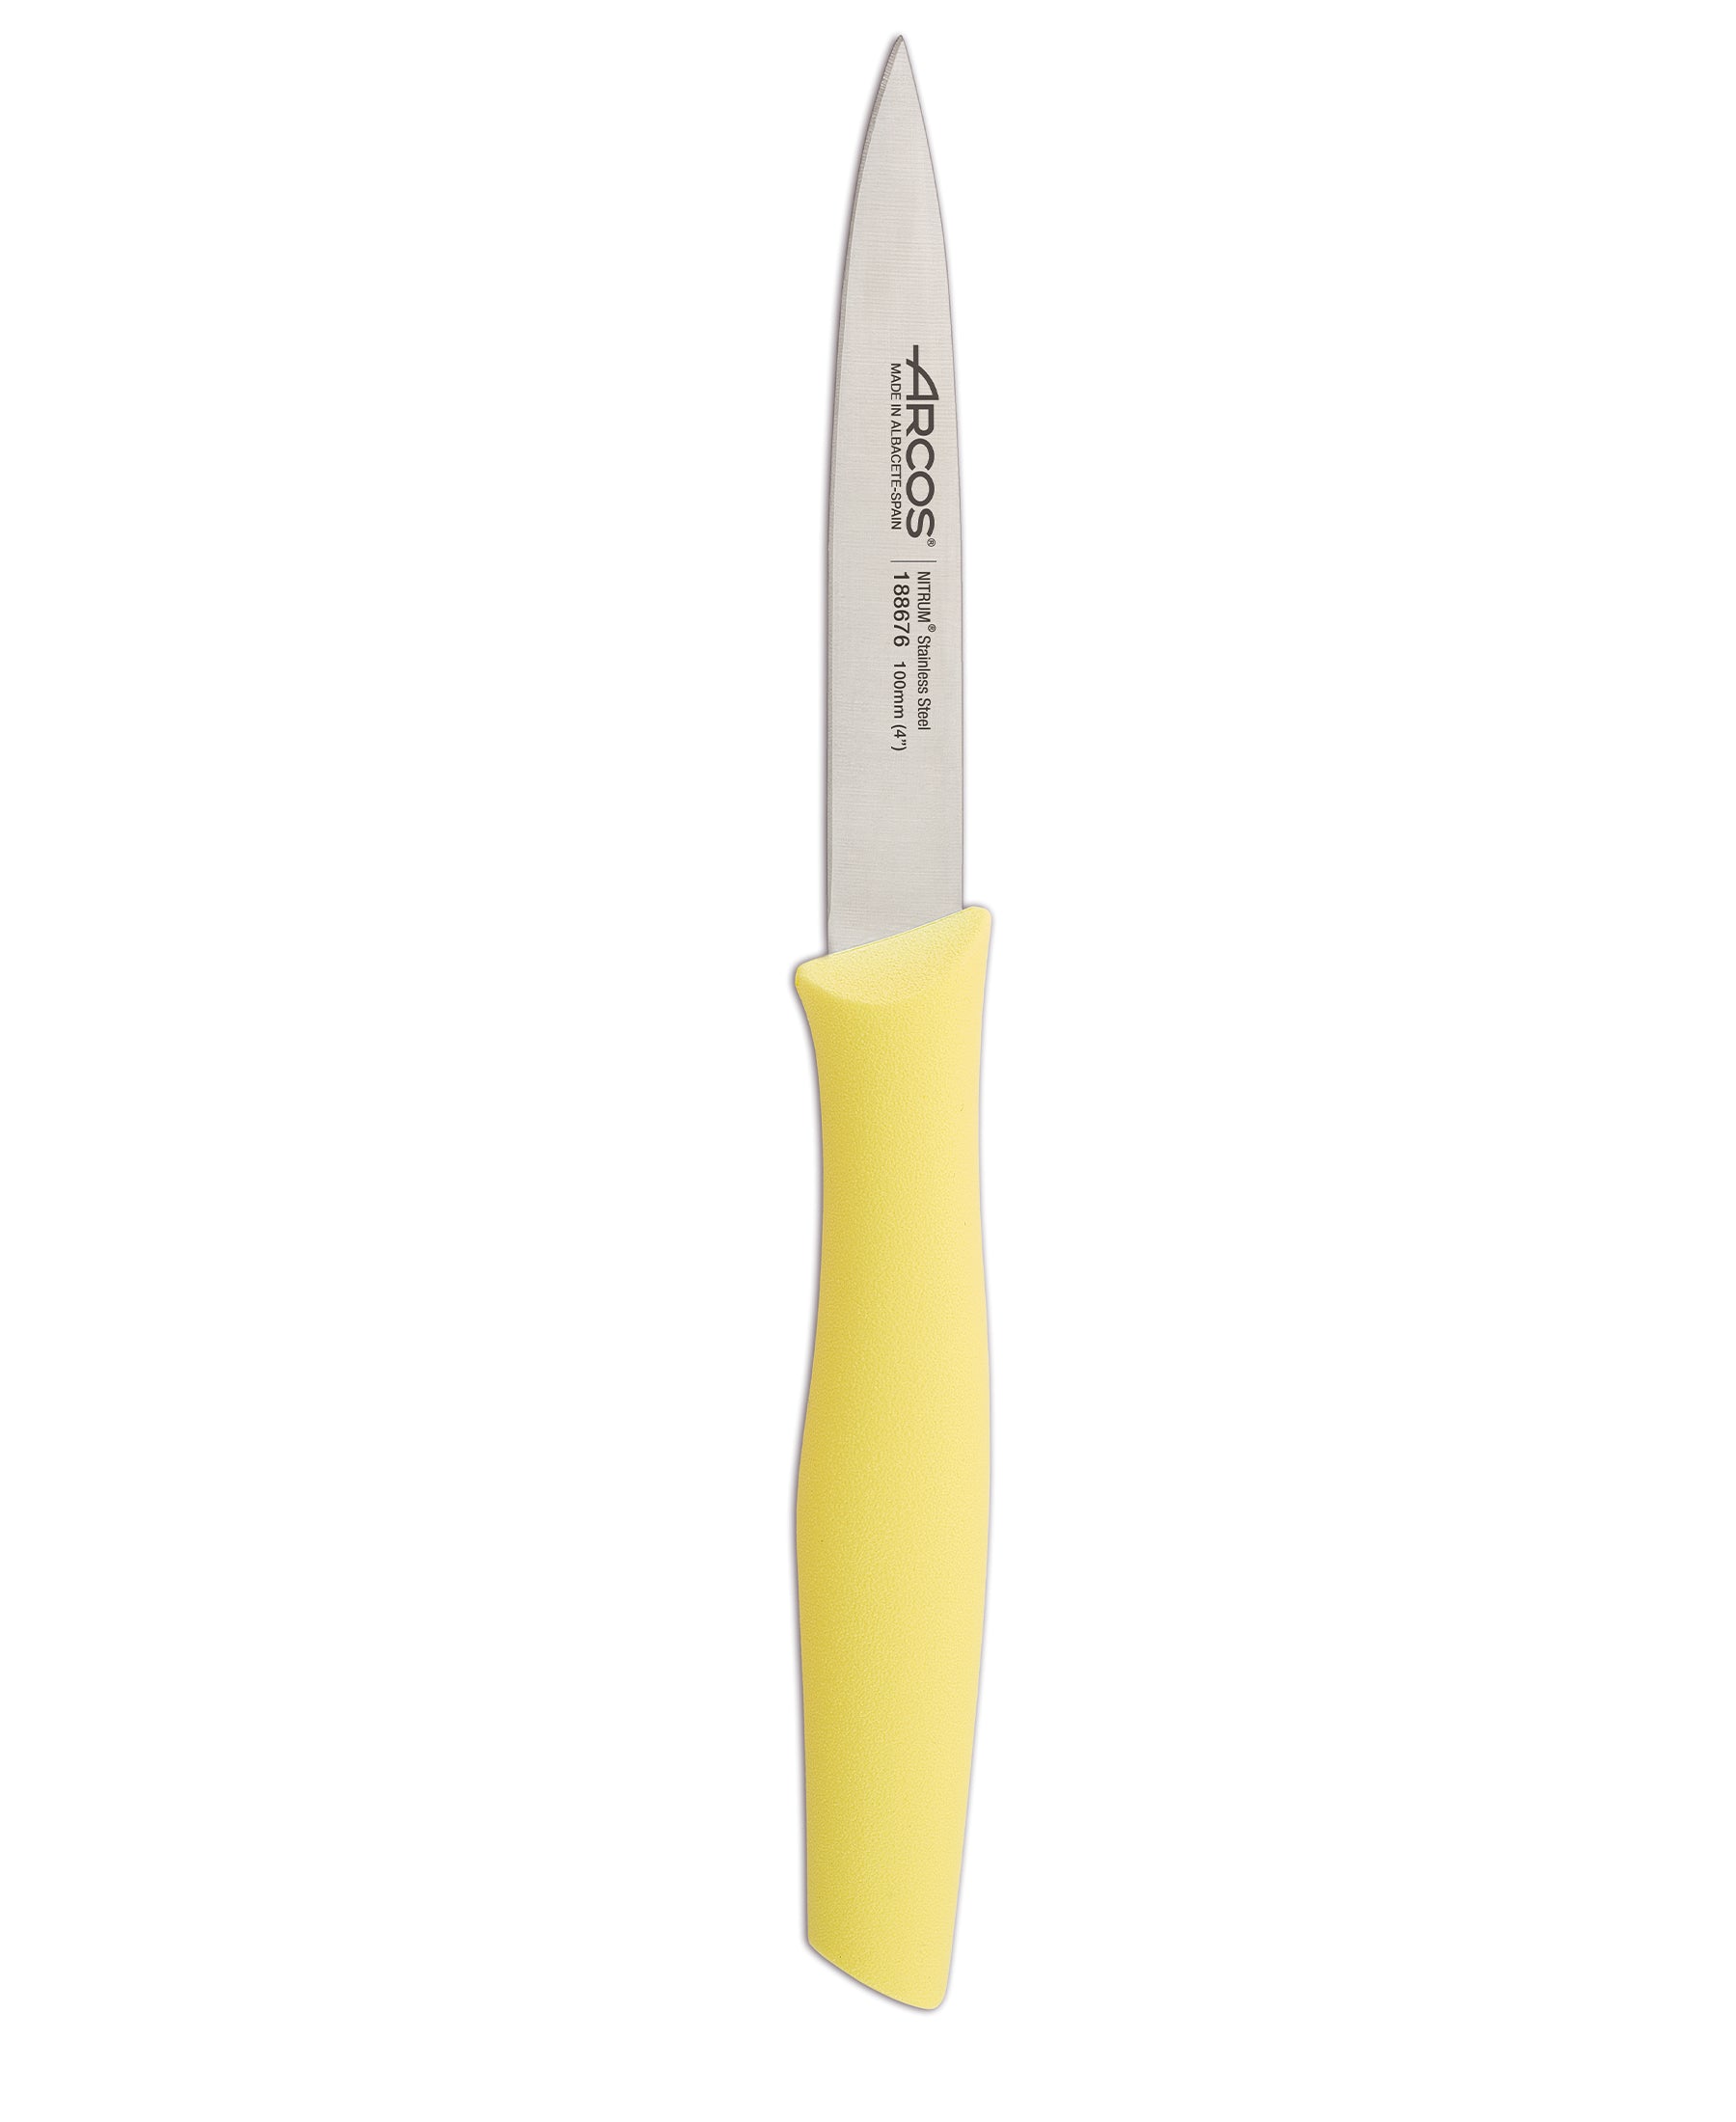 Arcos Pairing Knife 100mm - Yellow